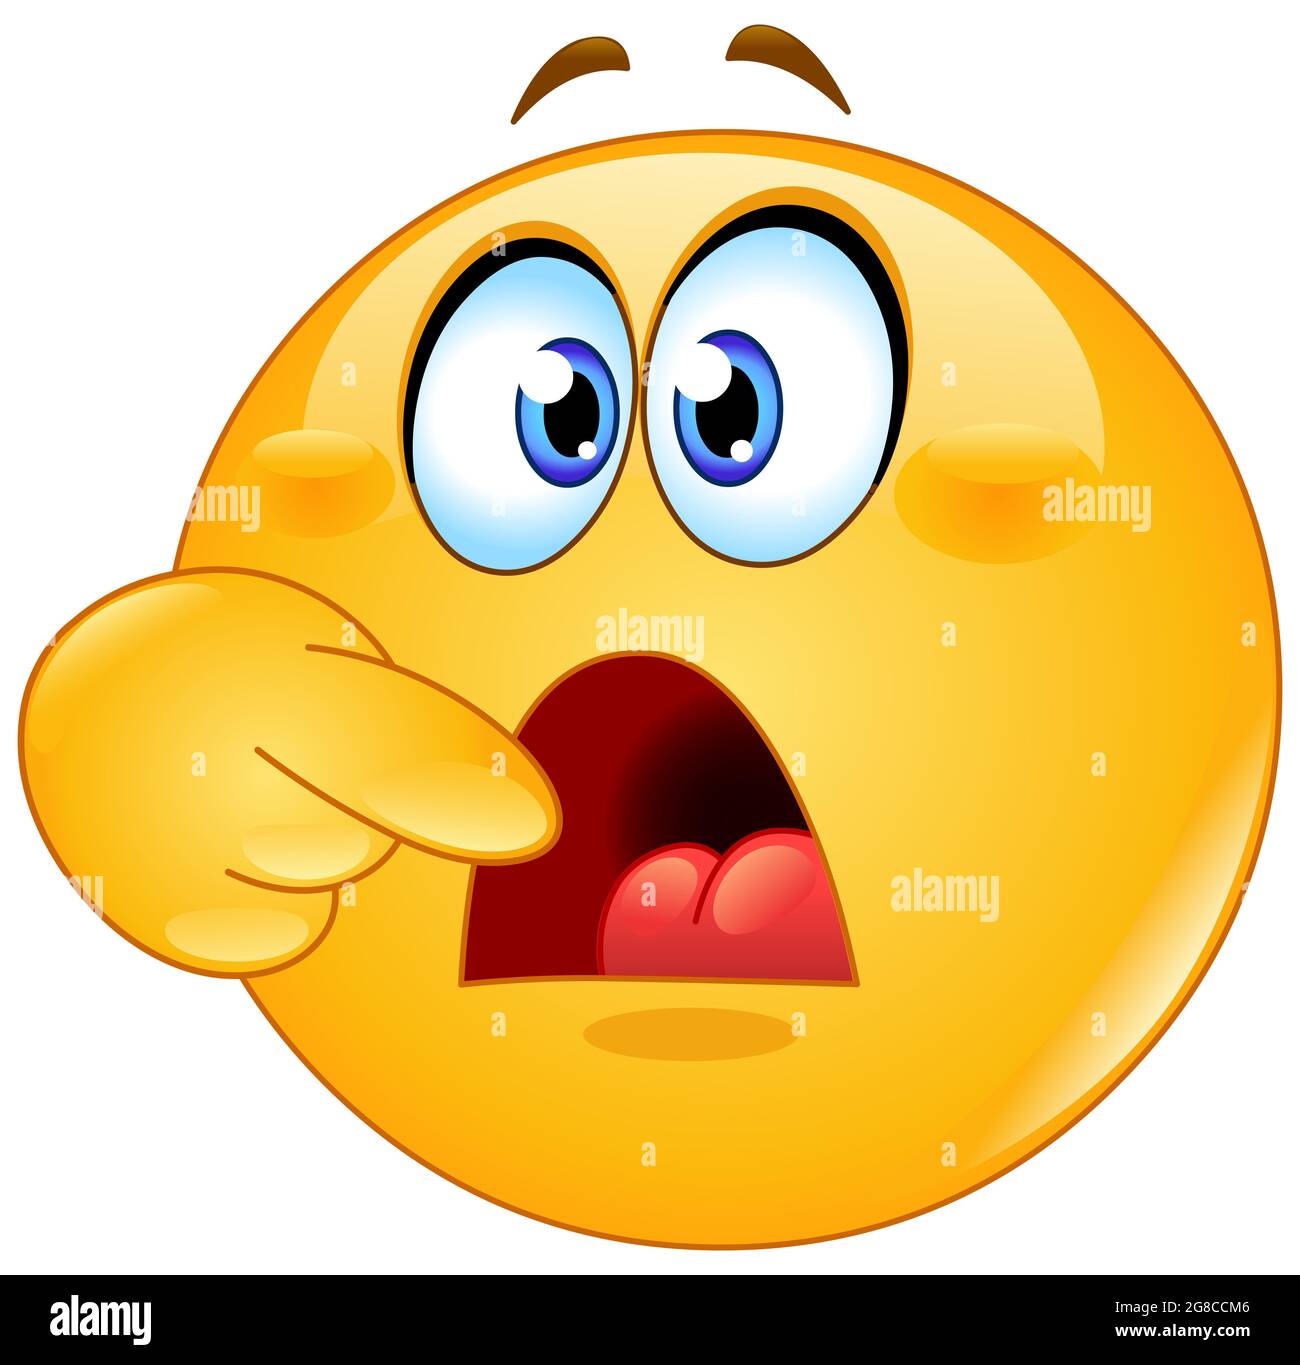 Hungry emoji emoticon asking for food by pointing to his open mouth. Stock Photo